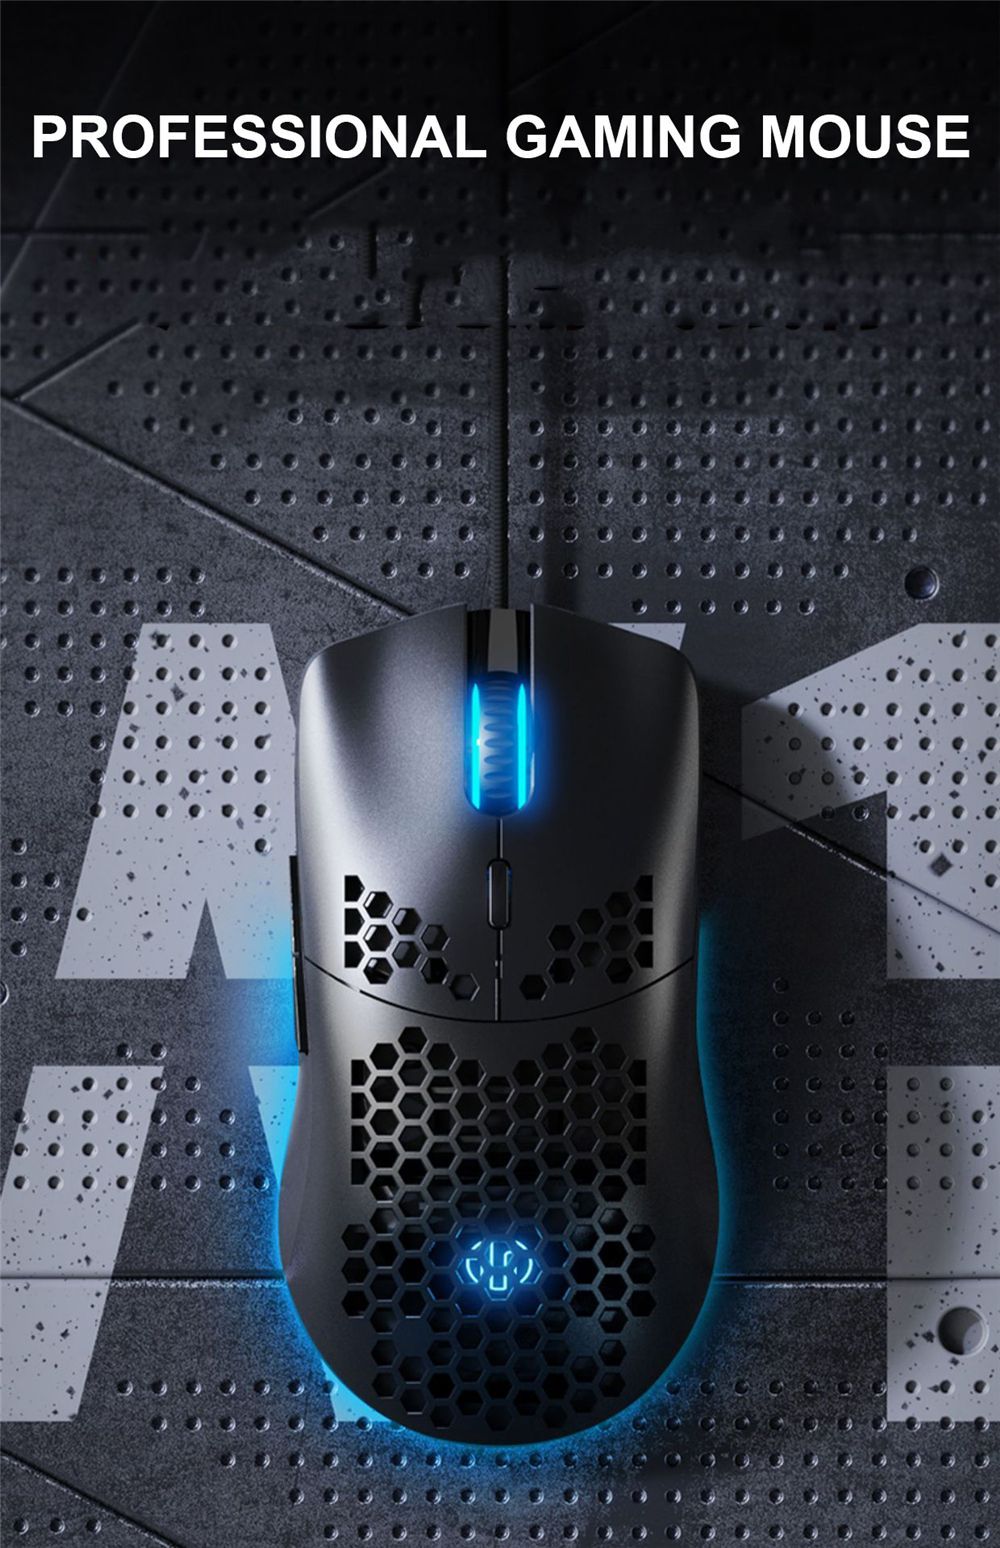 Inphic-W10-Wired-Lightweight-Hollowed-Mouse-Gaming-E-sport-Mouse-Luminous-RGB-for-Pro-Gamers-and-Off-1735595